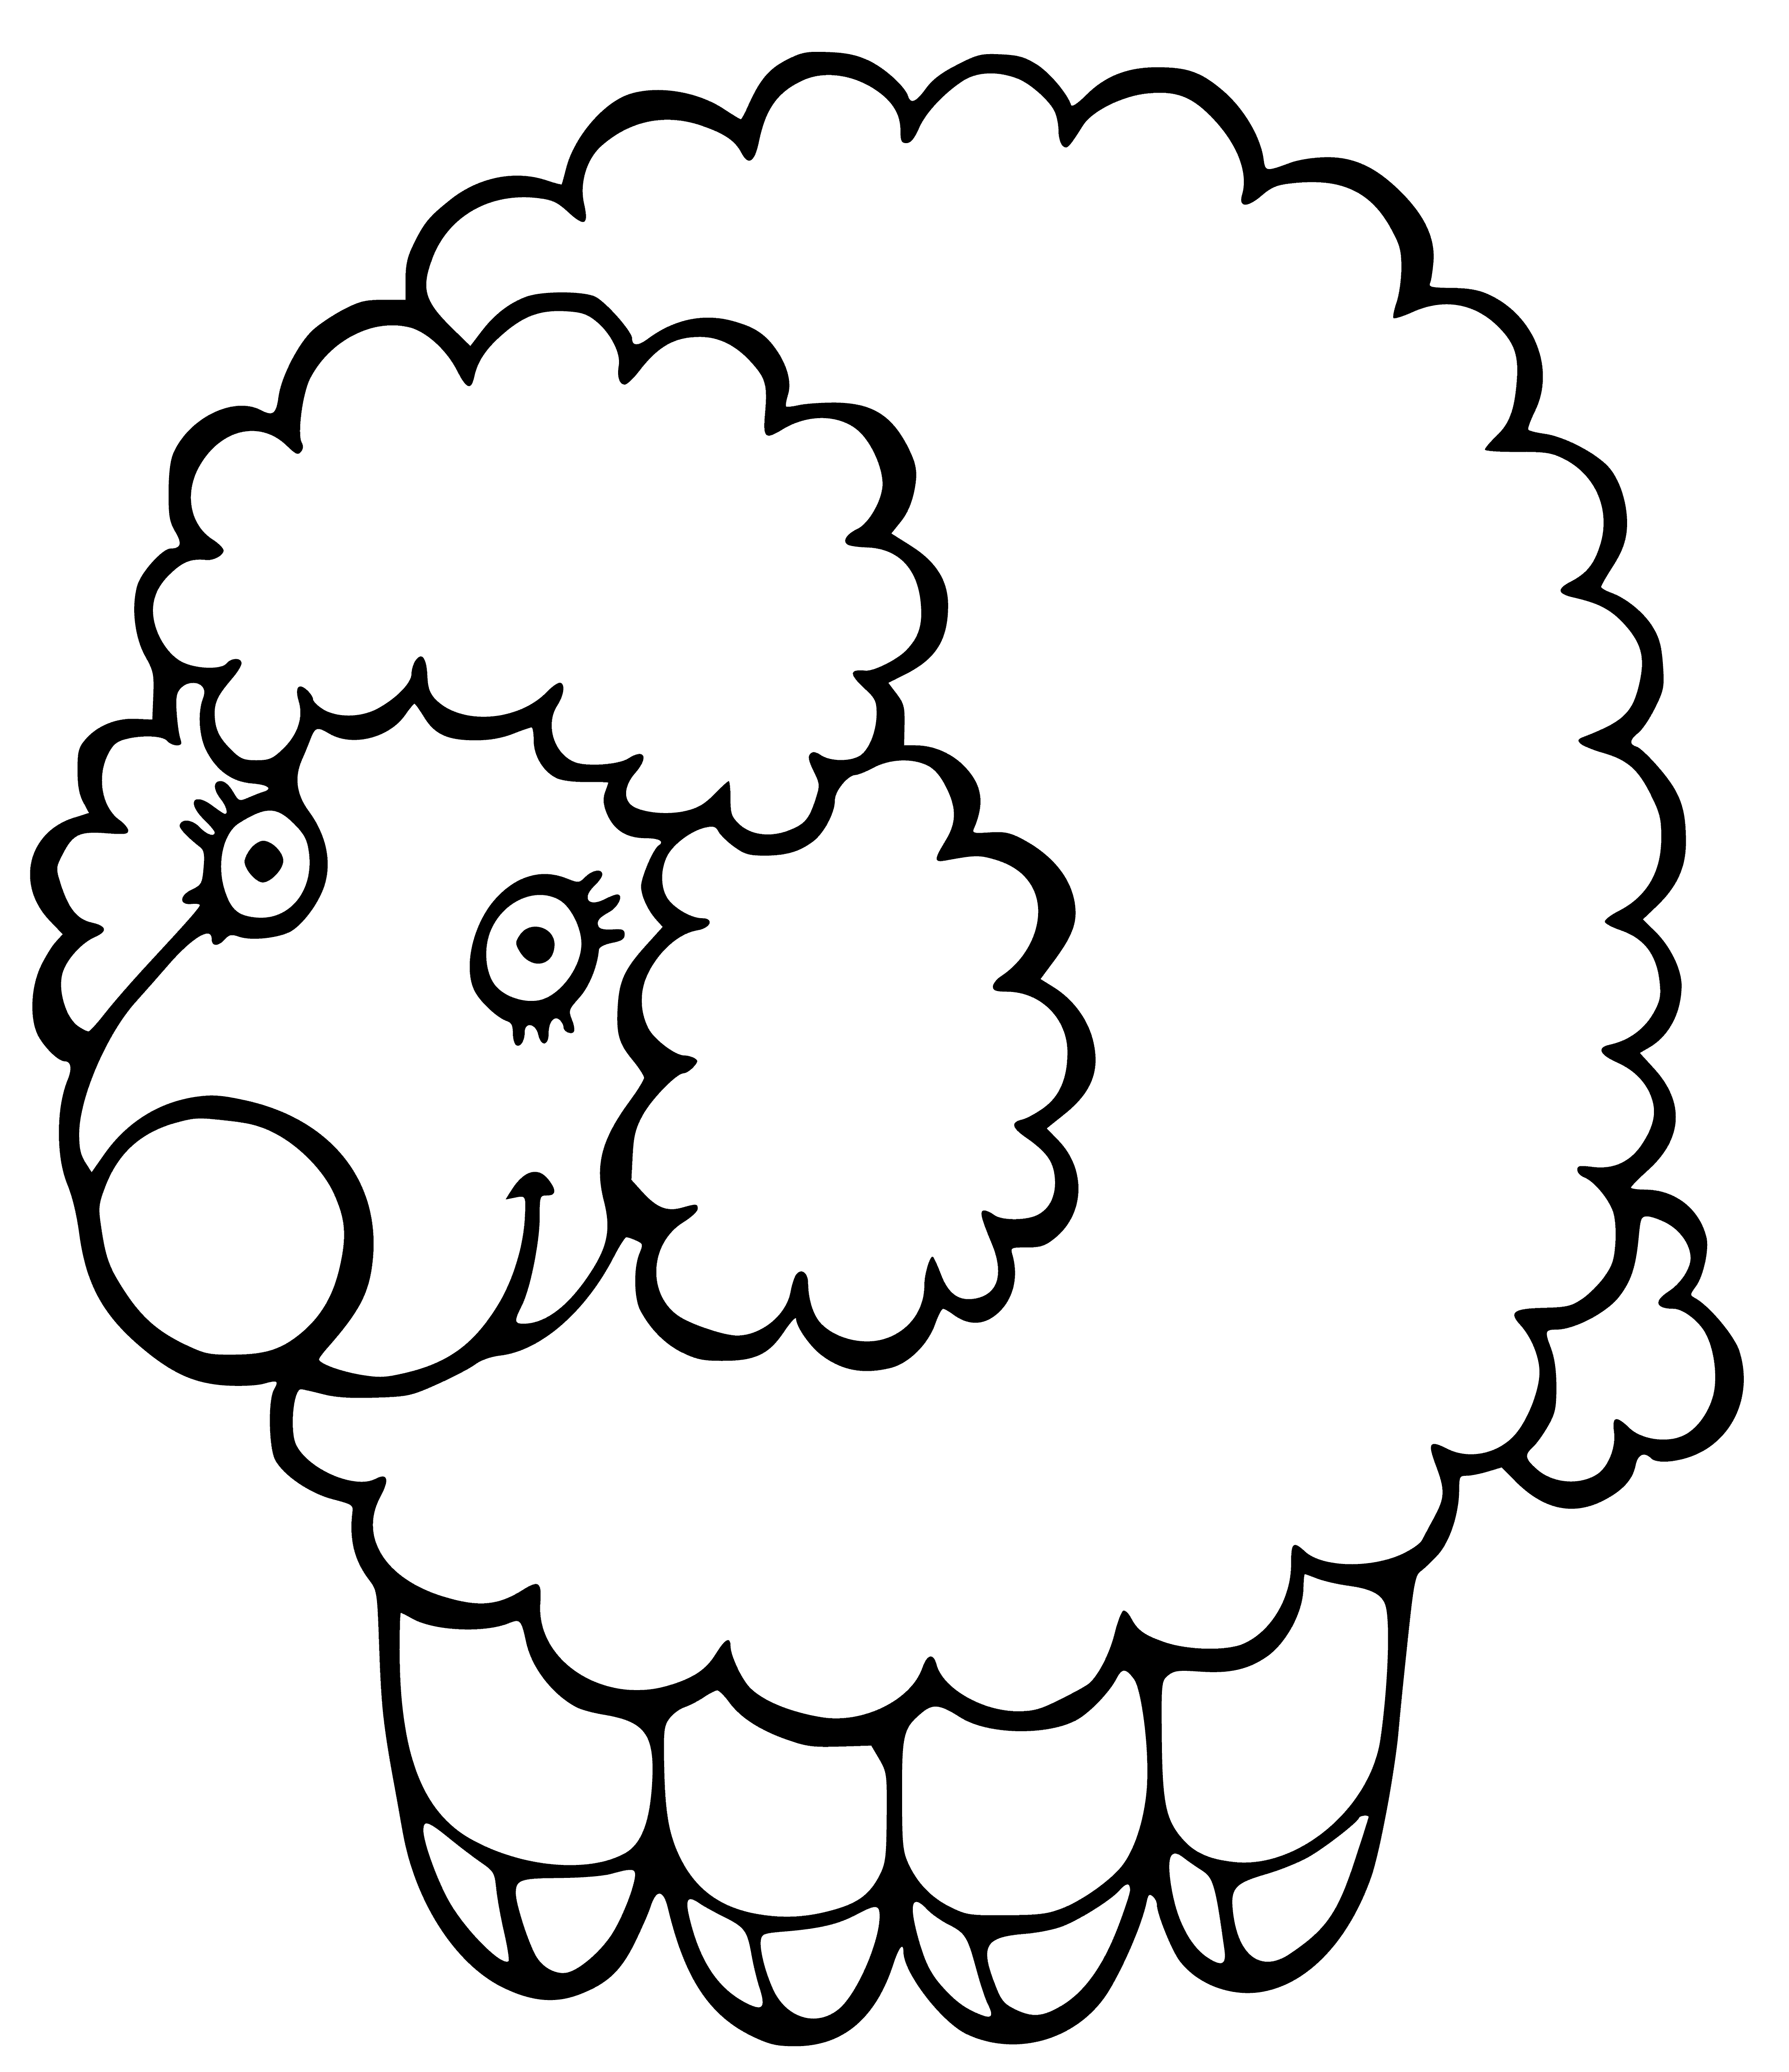 coloring page: A lamb's fleece is used to make wool, which is used in textiles, or fabric. #SheepFacts